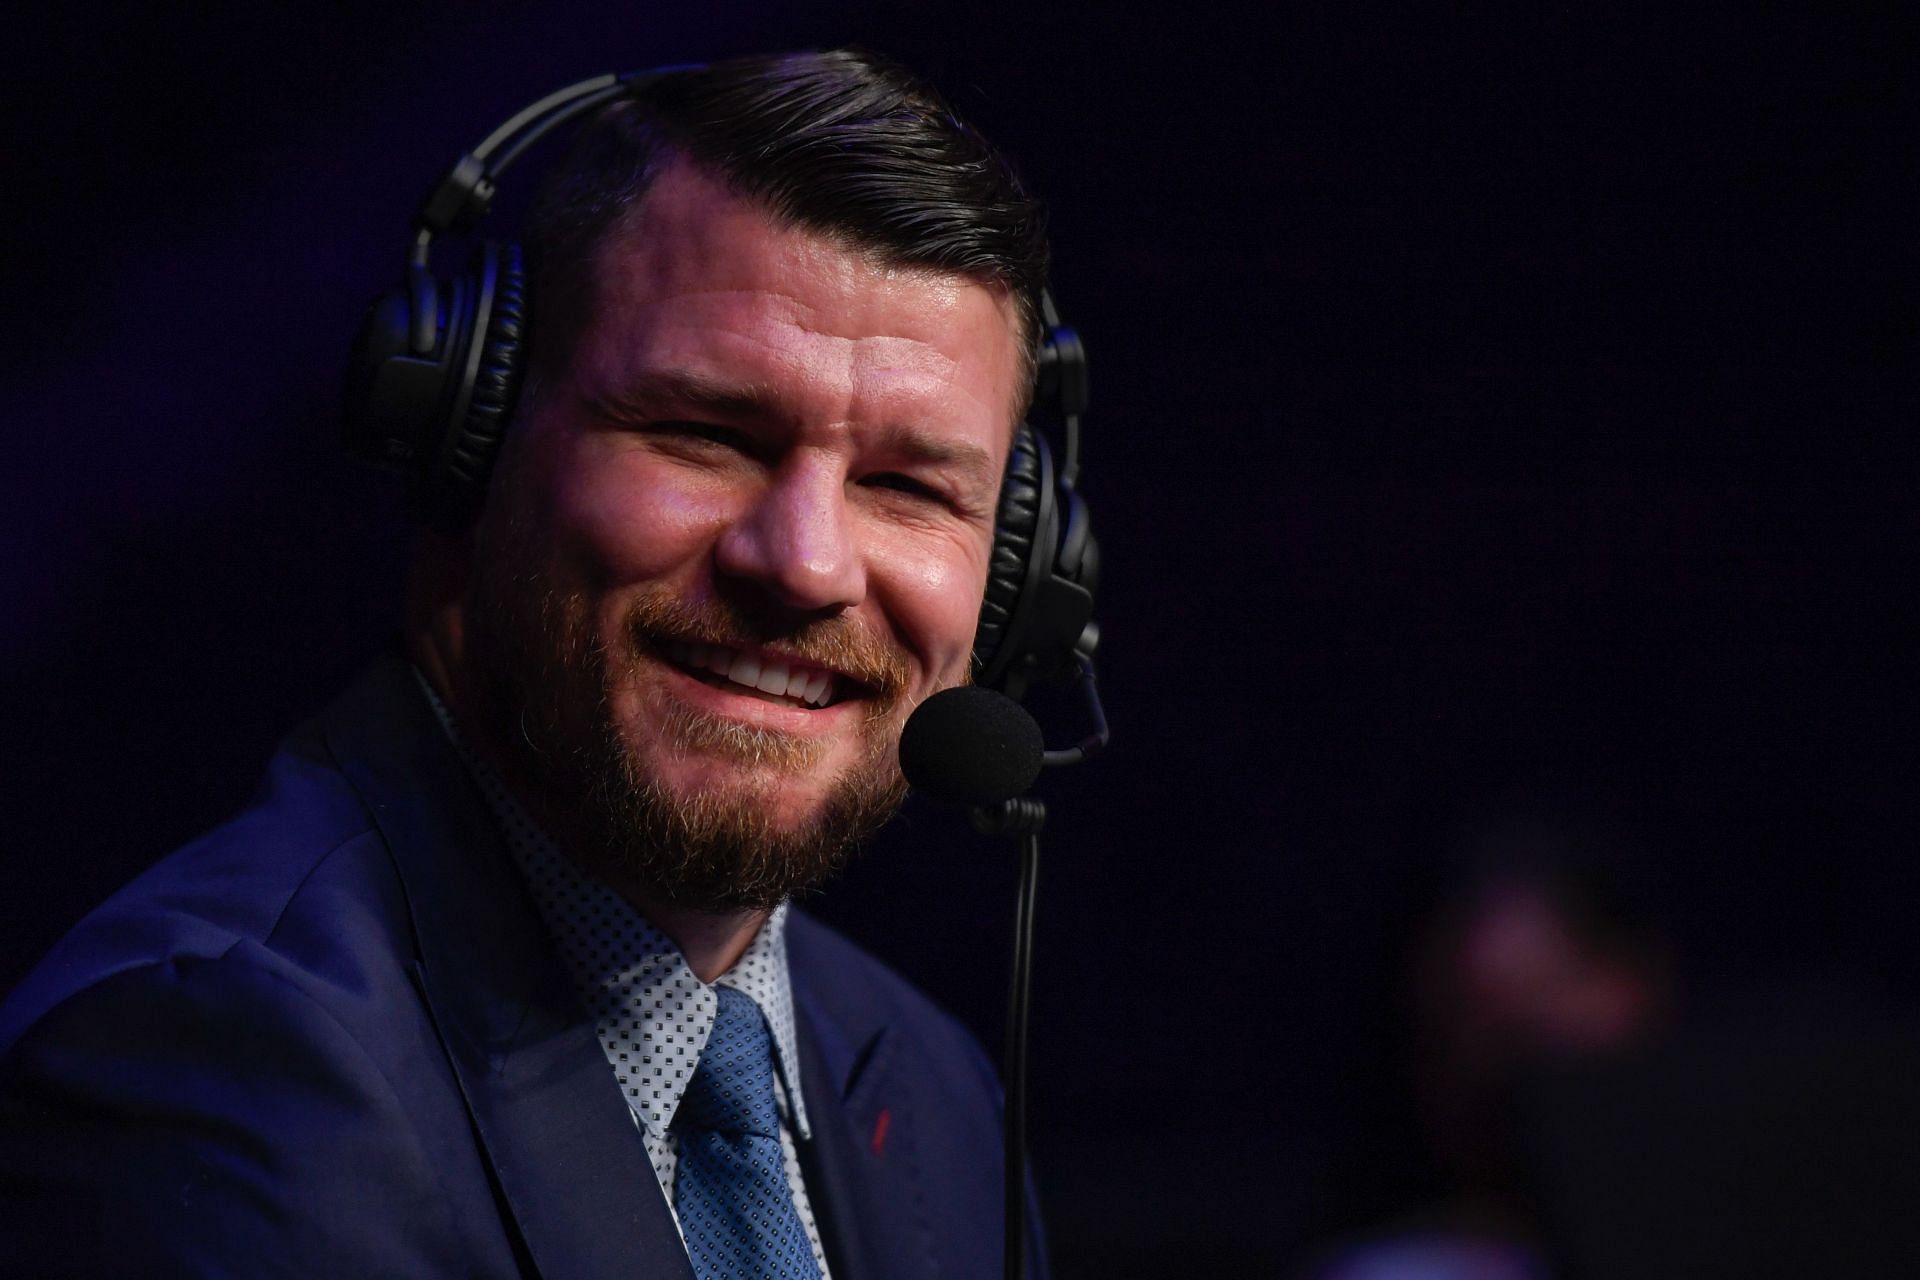 Michael Bisping shares his opinion on the most underrated skill for a fighter